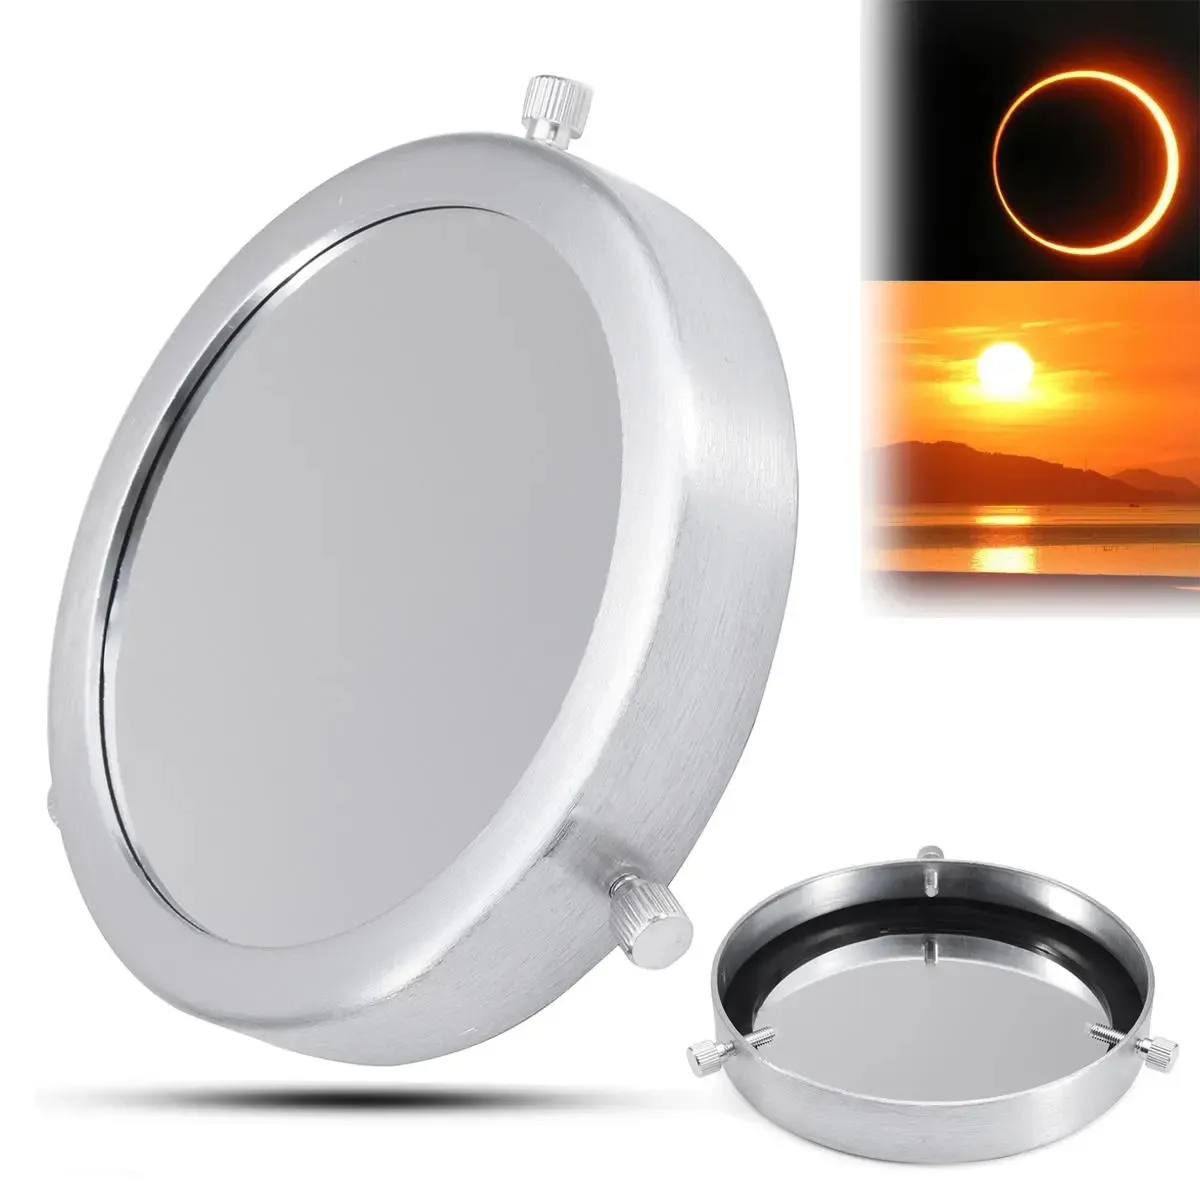 Silver 90-112mm Solar Filter Lens Baader Telescope Film Metal Cover For Astronomical